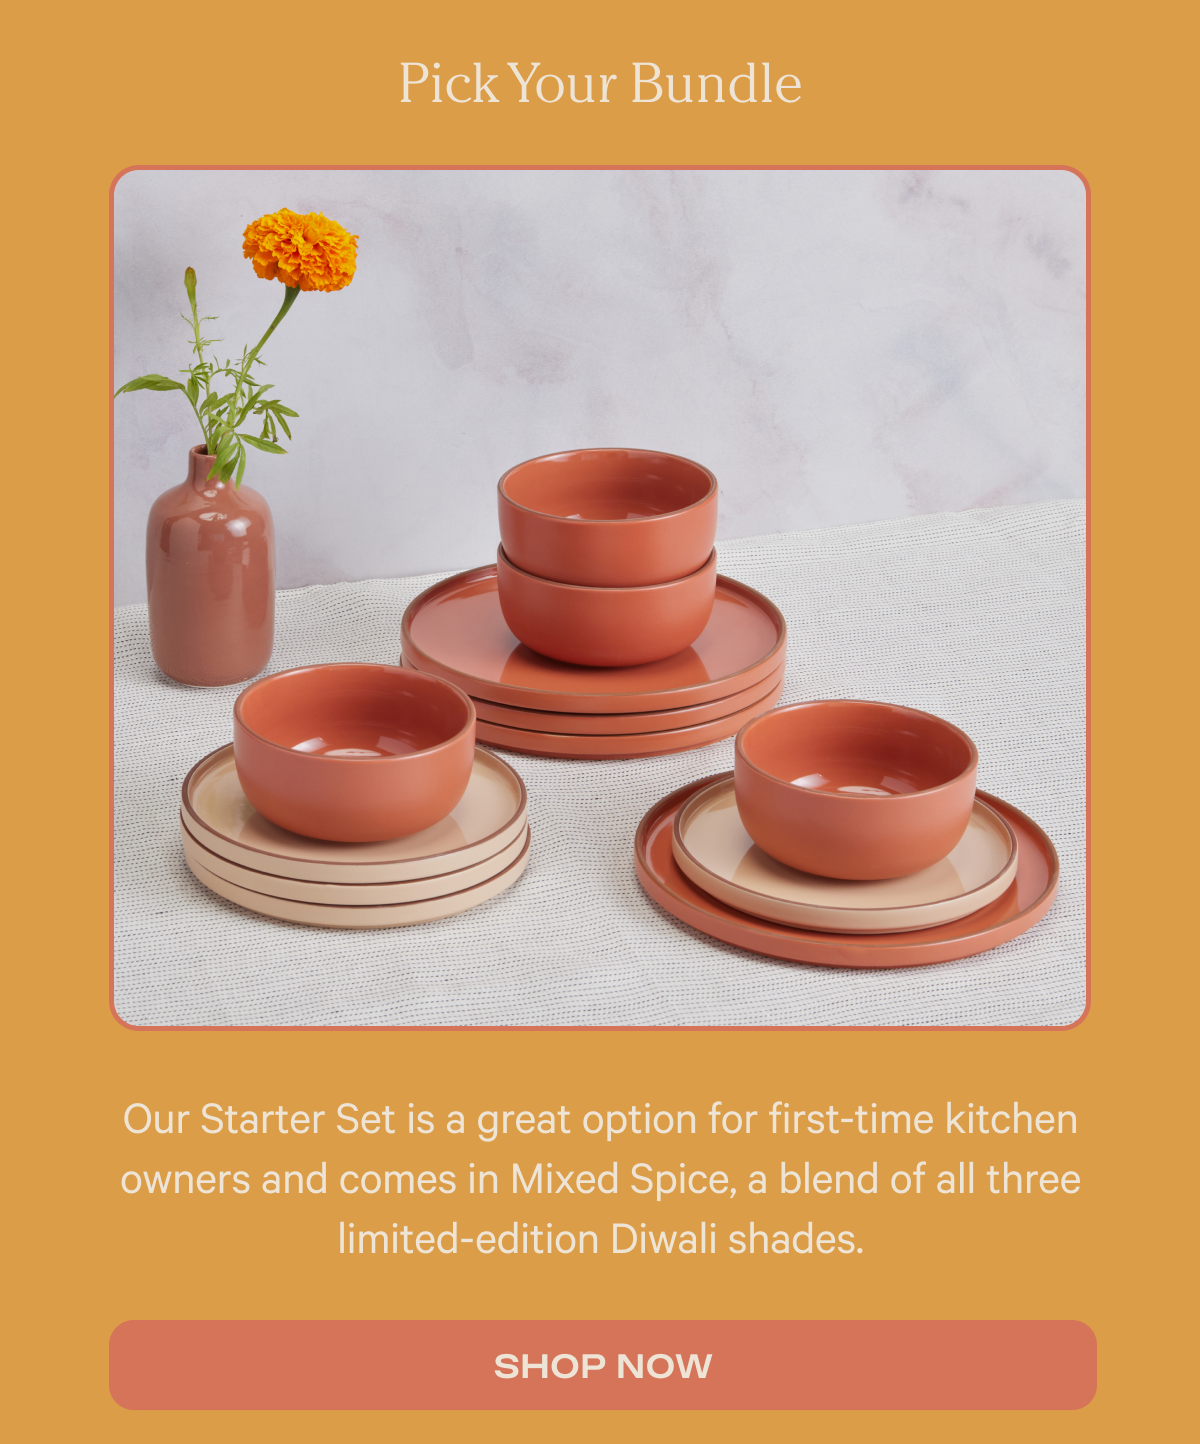 Pick Your Bundle - Our Starter Set is a great option for first-time kitchen owners and comes in Mixed Spice, a blend of all three limited-edition Diwali shades. - Shop Now